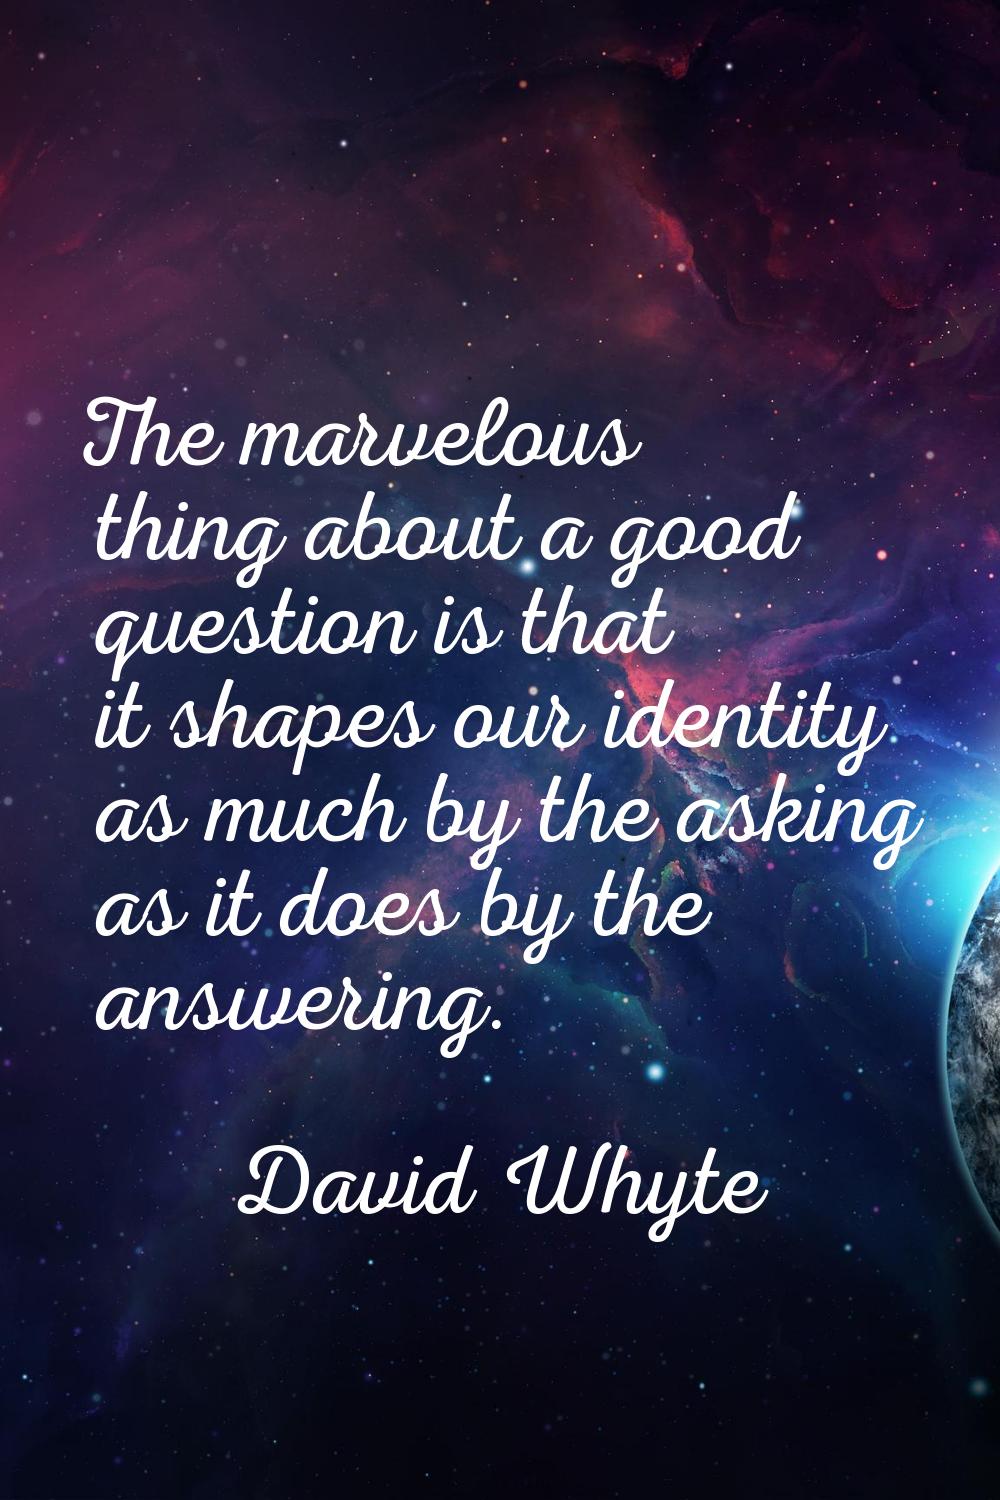 The marvelous thing about a good question is that it shapes our identity as much by the asking as i